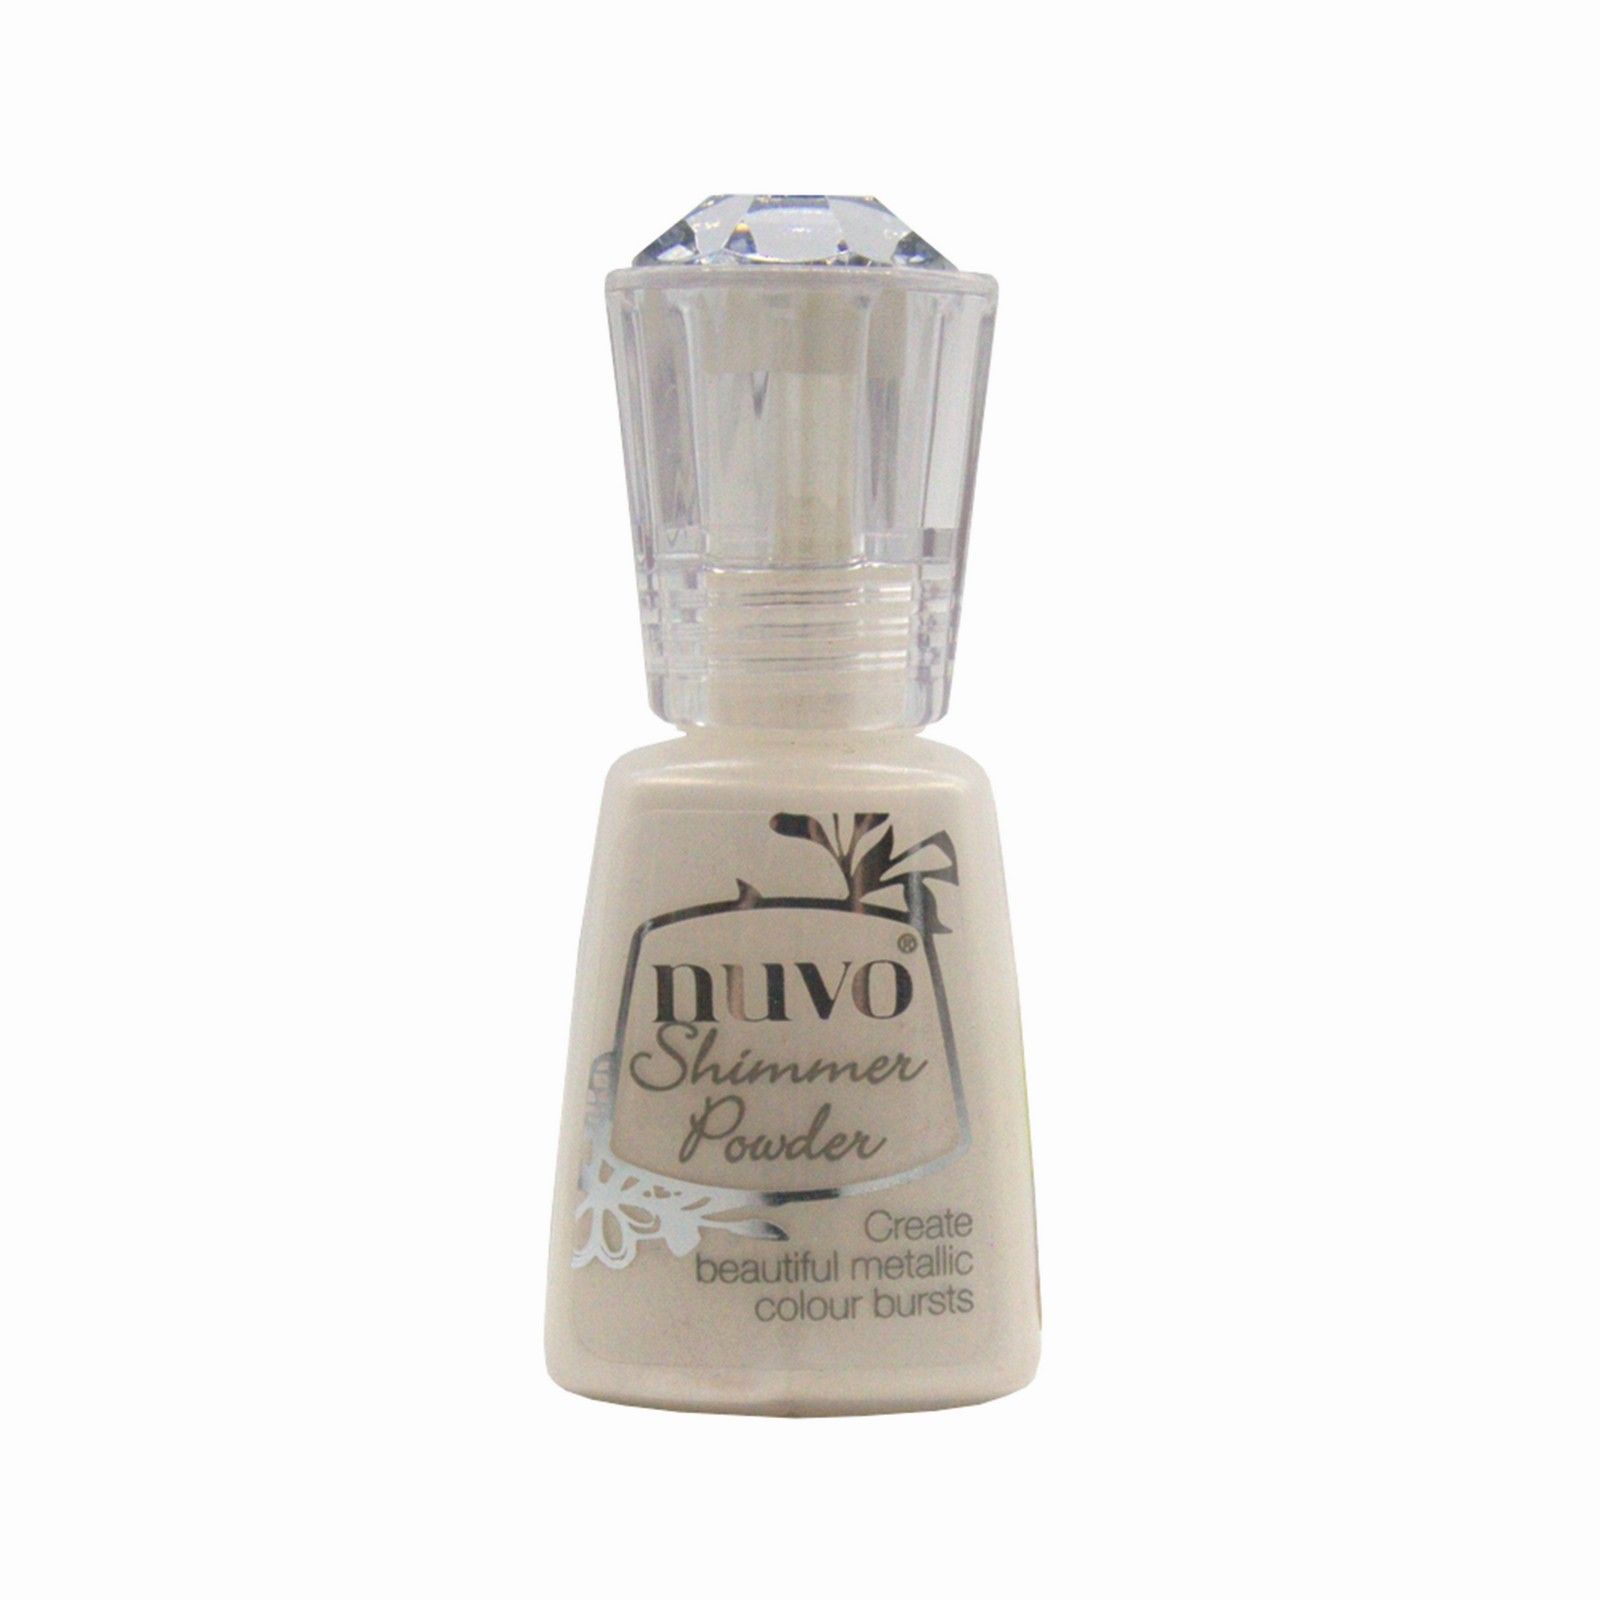 Nuvo Spring Meadow Shimmer Powder Ivory Willow